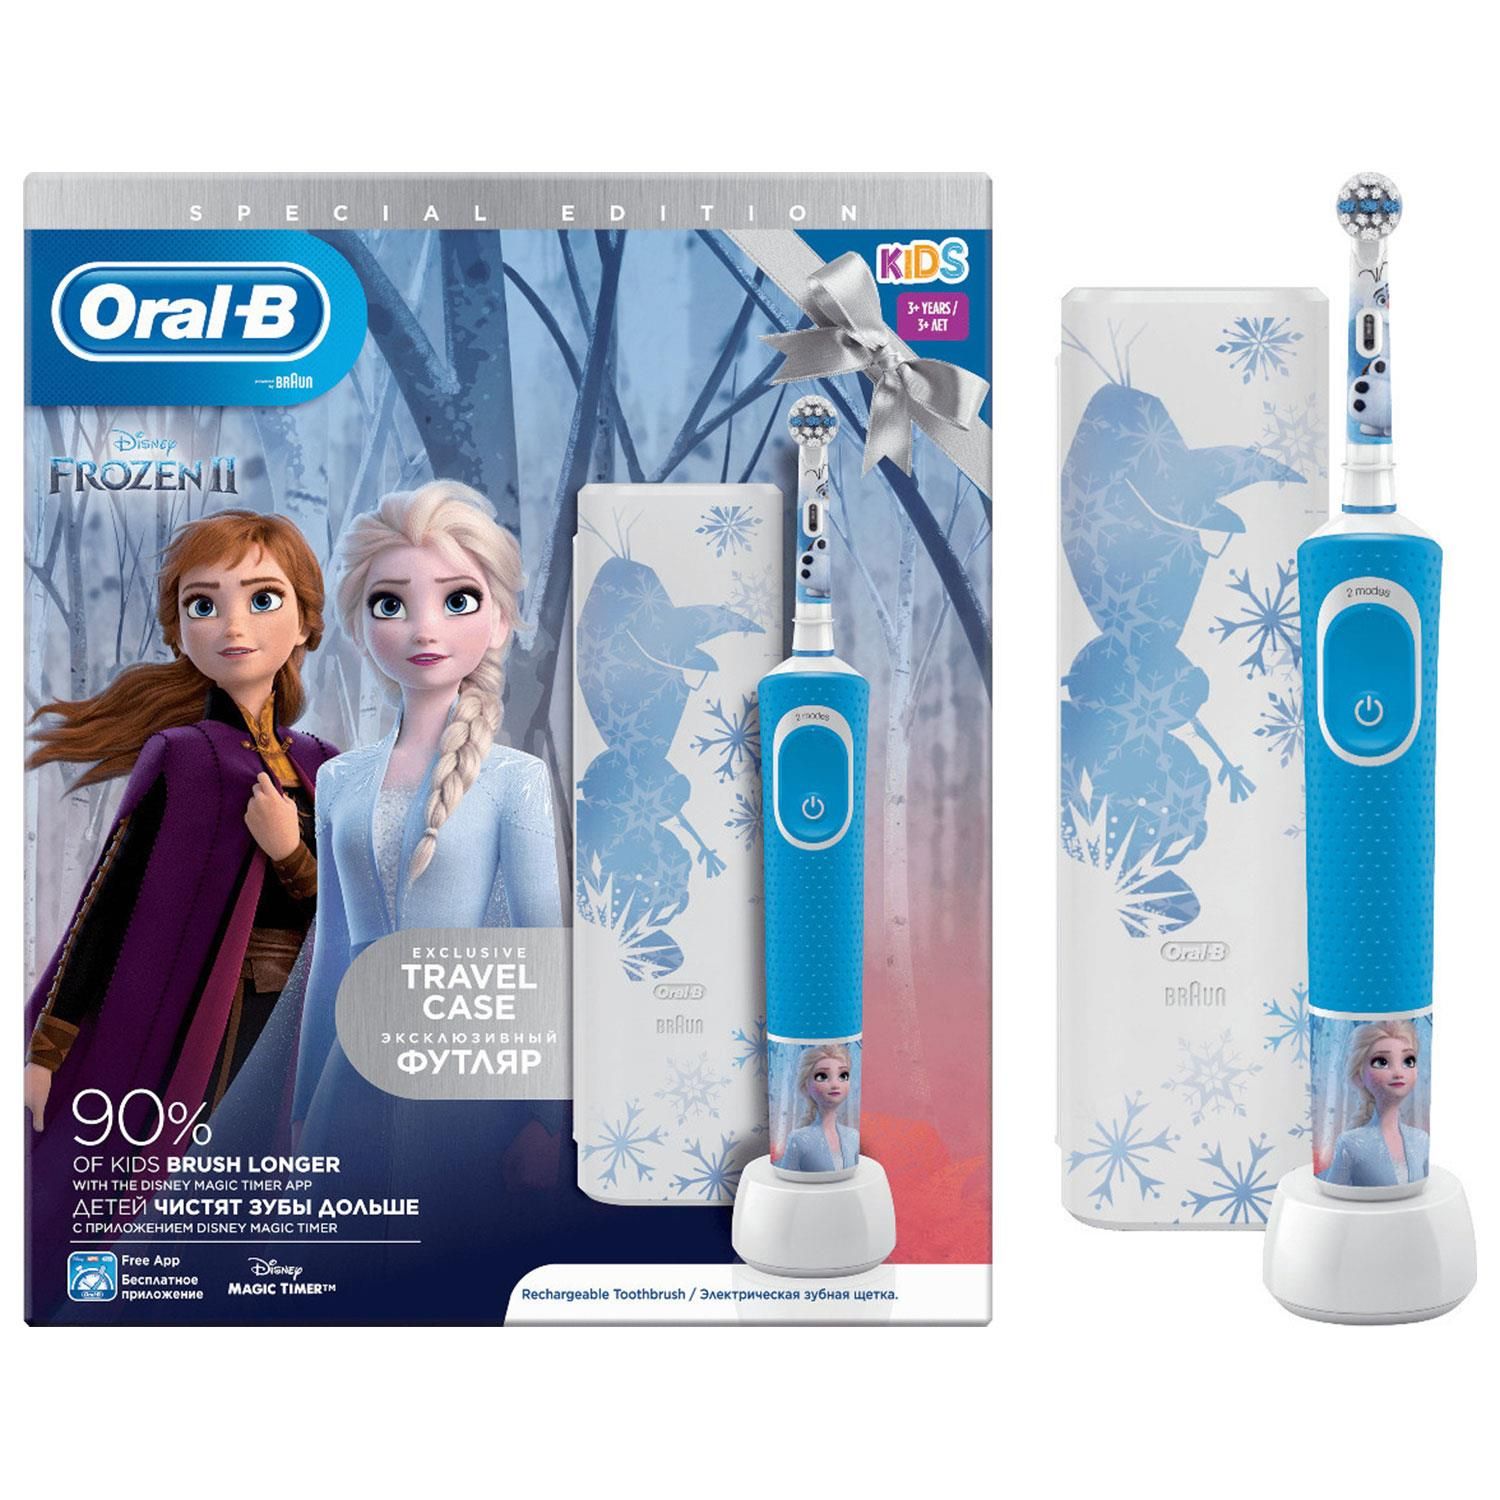 Oral-B Power 3+ Disney Frozen II Electric Toothbrush Giftset with Travel Case.  The Oral-B Kids Electric Toothbrush for ages 3+ entertains kids with Disney's Frozen II film while offering gentle and effective cleaning with a toothbrush recommended by Oral-B dentists. With a unique brushing function for delicate baby teeth, this toothbrush gently cleanses children's teeth. It removes more plaque from a simple manual toothbrush. Includes four stickers from Disney's Frozen film for decorating the handle.

Key Features:  

  Specially designed to be soft with baby teeth
  Round toothbrush head ideal for small mouths
  Particularly soft fibres that are soft with the gums
  Suitable for ages 3+
  Decorate the brush handle with 4 stickers from Disney's Frozen II
  Works with the Oral-B Disney Magic Timer application
  Rechargeable battery for 8 days
  Encourages brushing for 2 minutes with the built-in timer

The Box contains: 1x electric toothbrush, 4x sticker for the body of the brush, 1x replacement stages powerhead, 1x travel case with a motif, 1x charging station